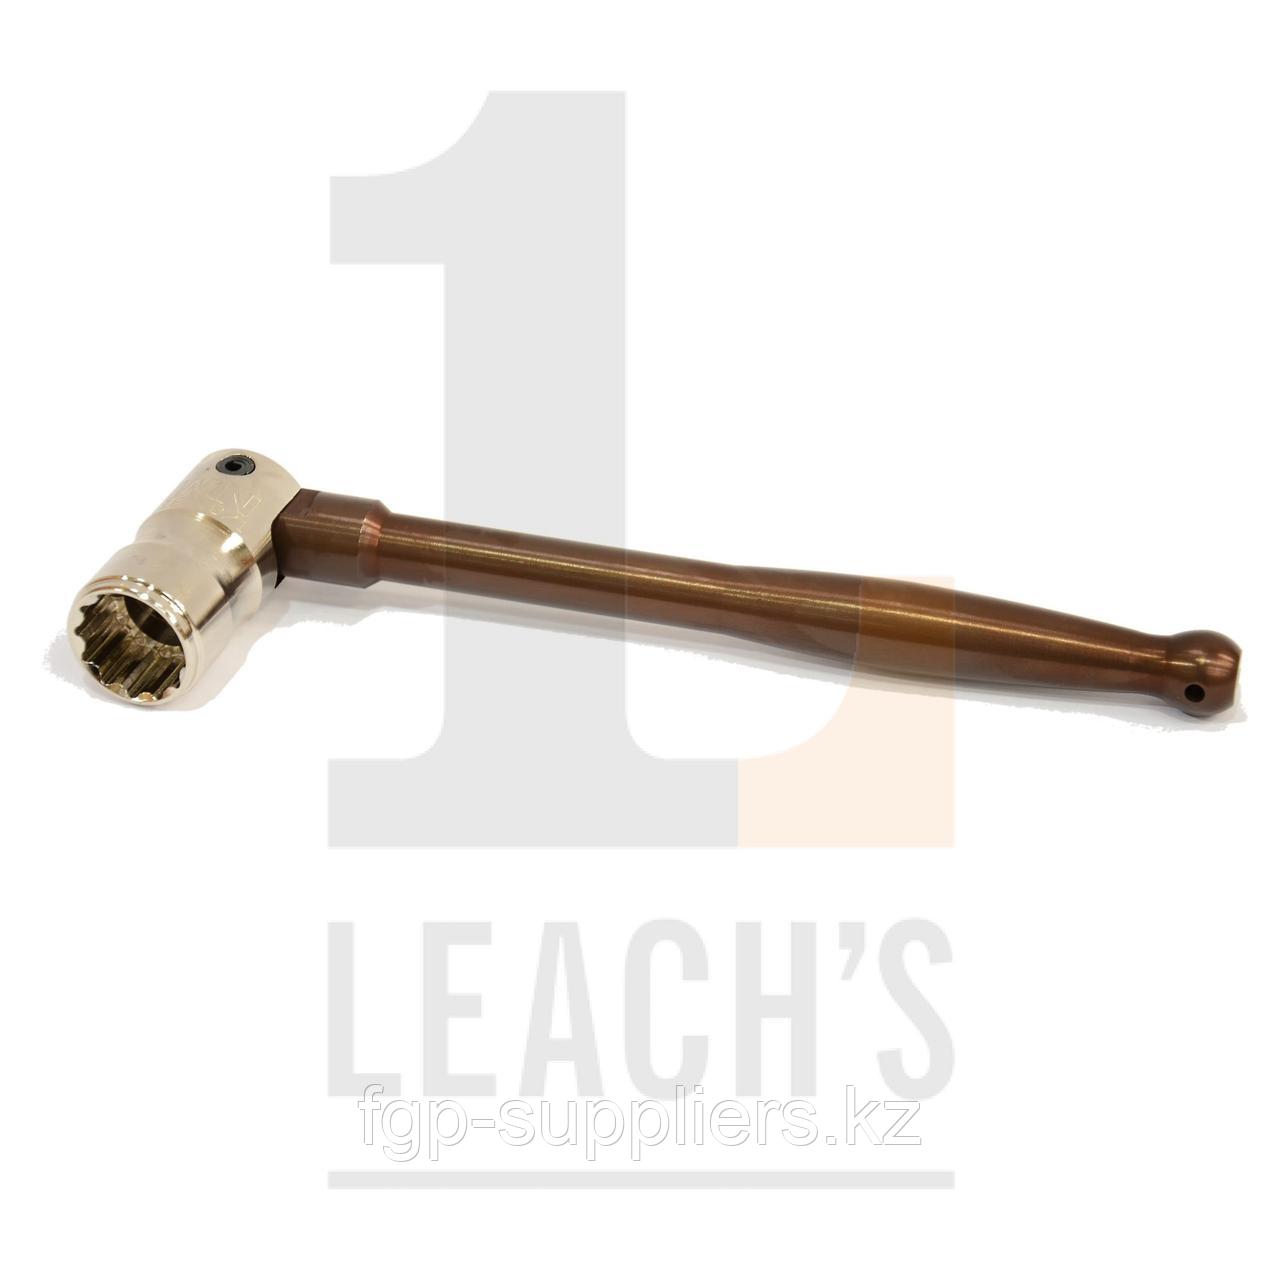 Coloured Whippet Spanner - 7/16" Leach's IMN Bi-Hex Steel Pinched Box with A.Alloy Bronze Handle / Цветной торцовый гаечный ключ – 7/16’’ Leach's IMN